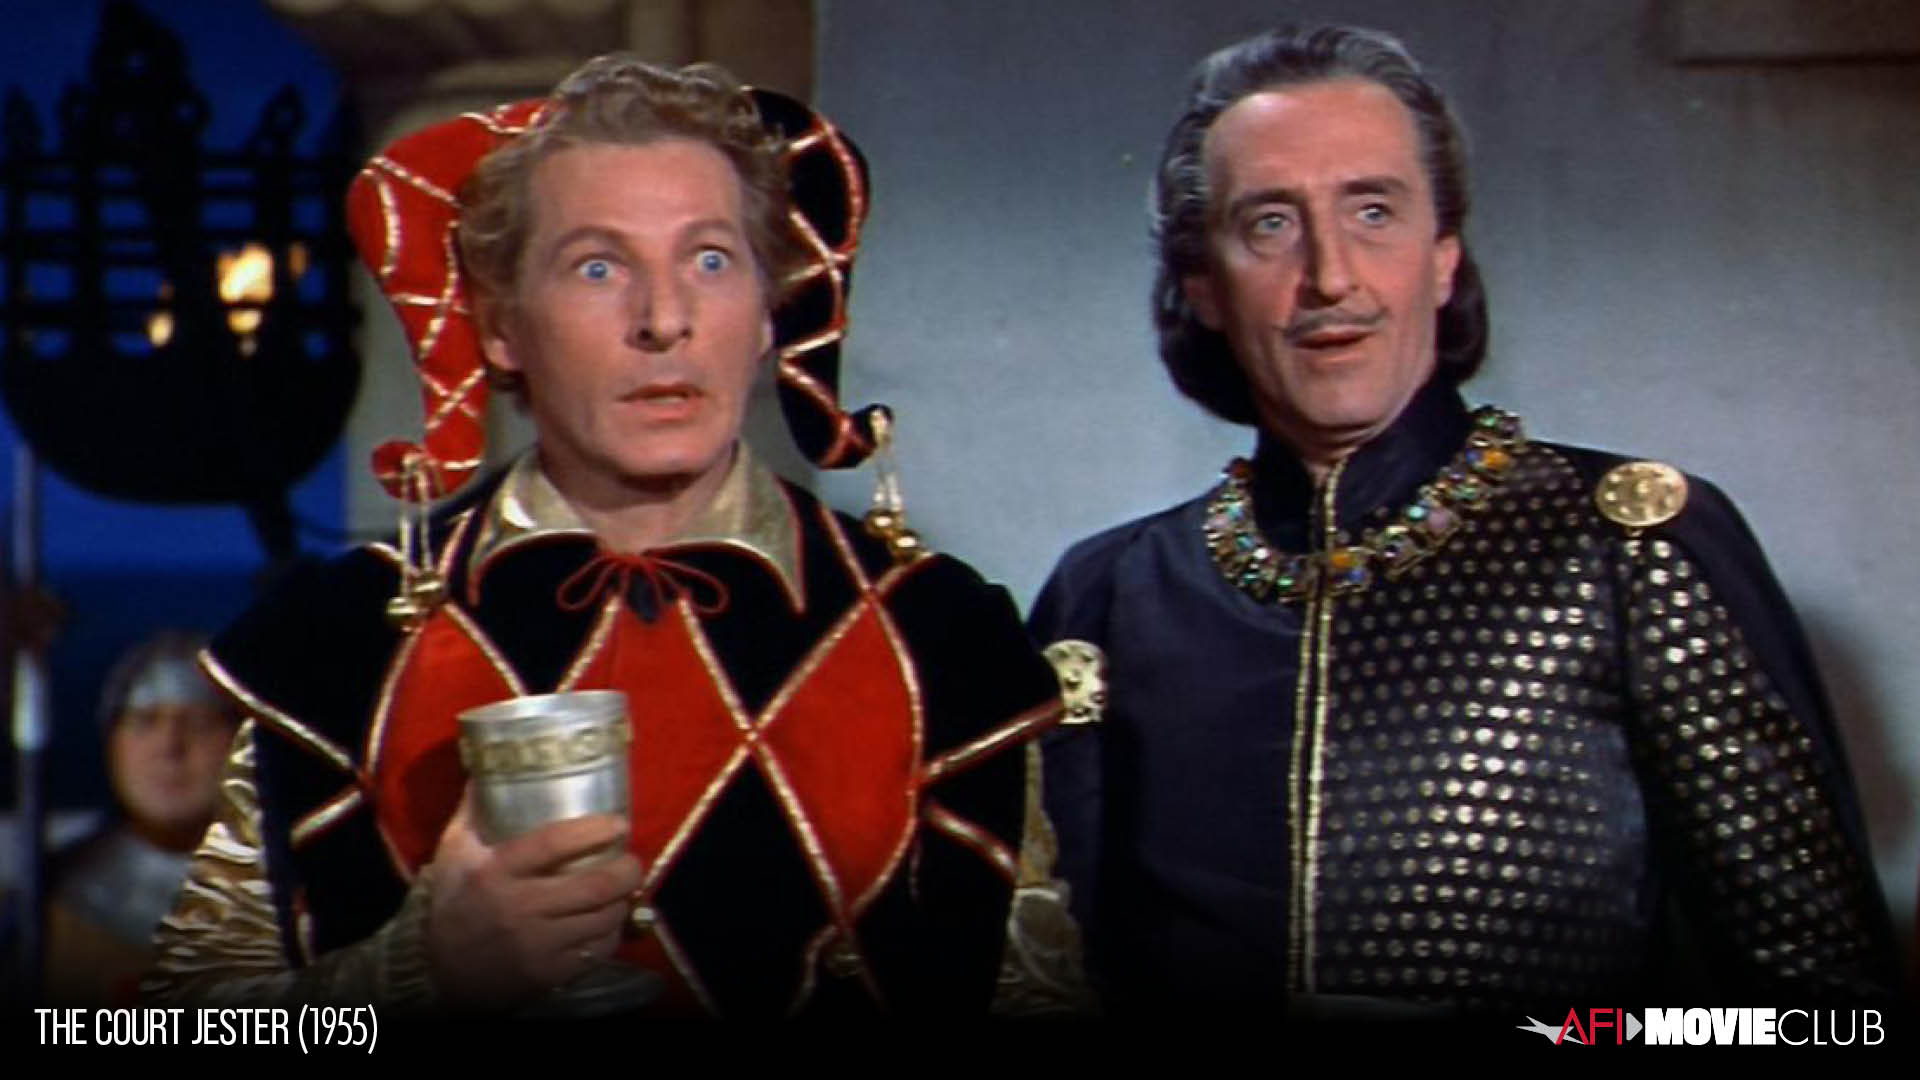 The Court Jester Film Still - Danny Kaye and Basil Rathbone